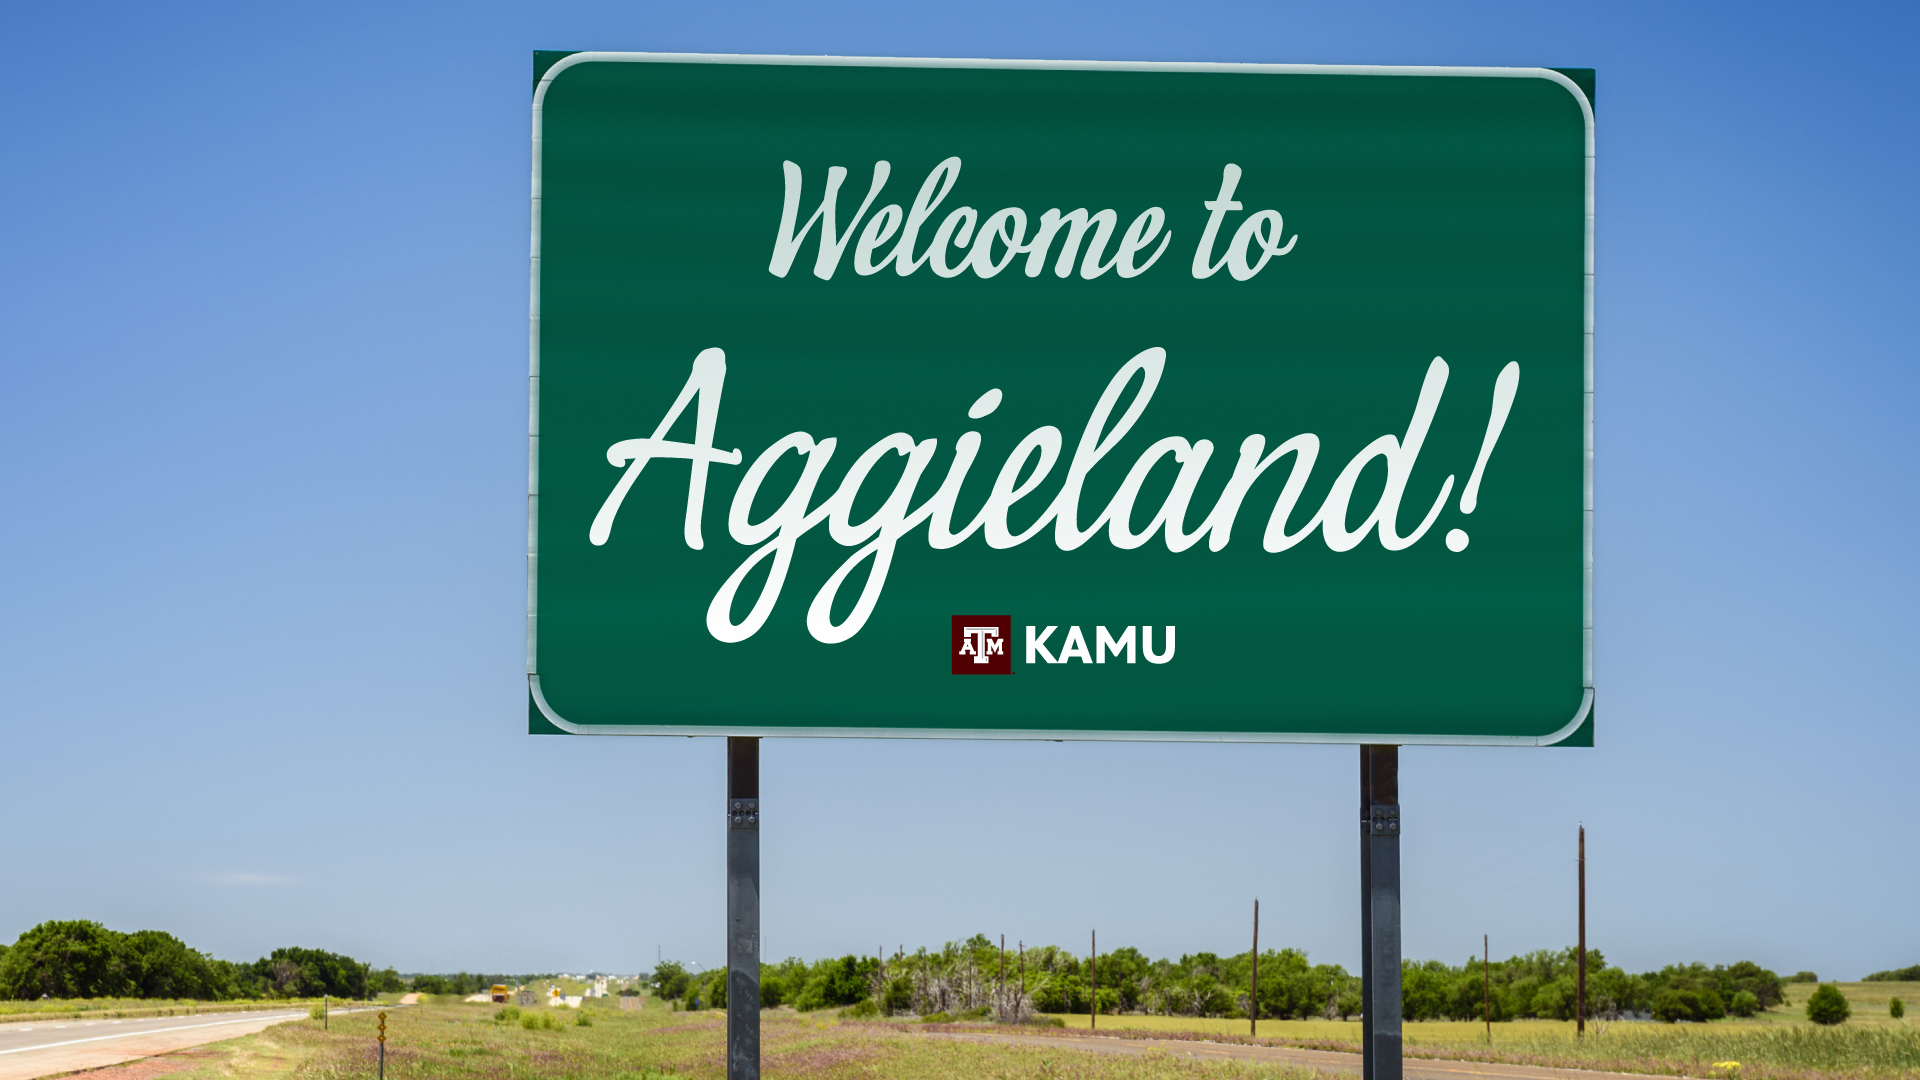 Welcome to Aggieland from KAMU!